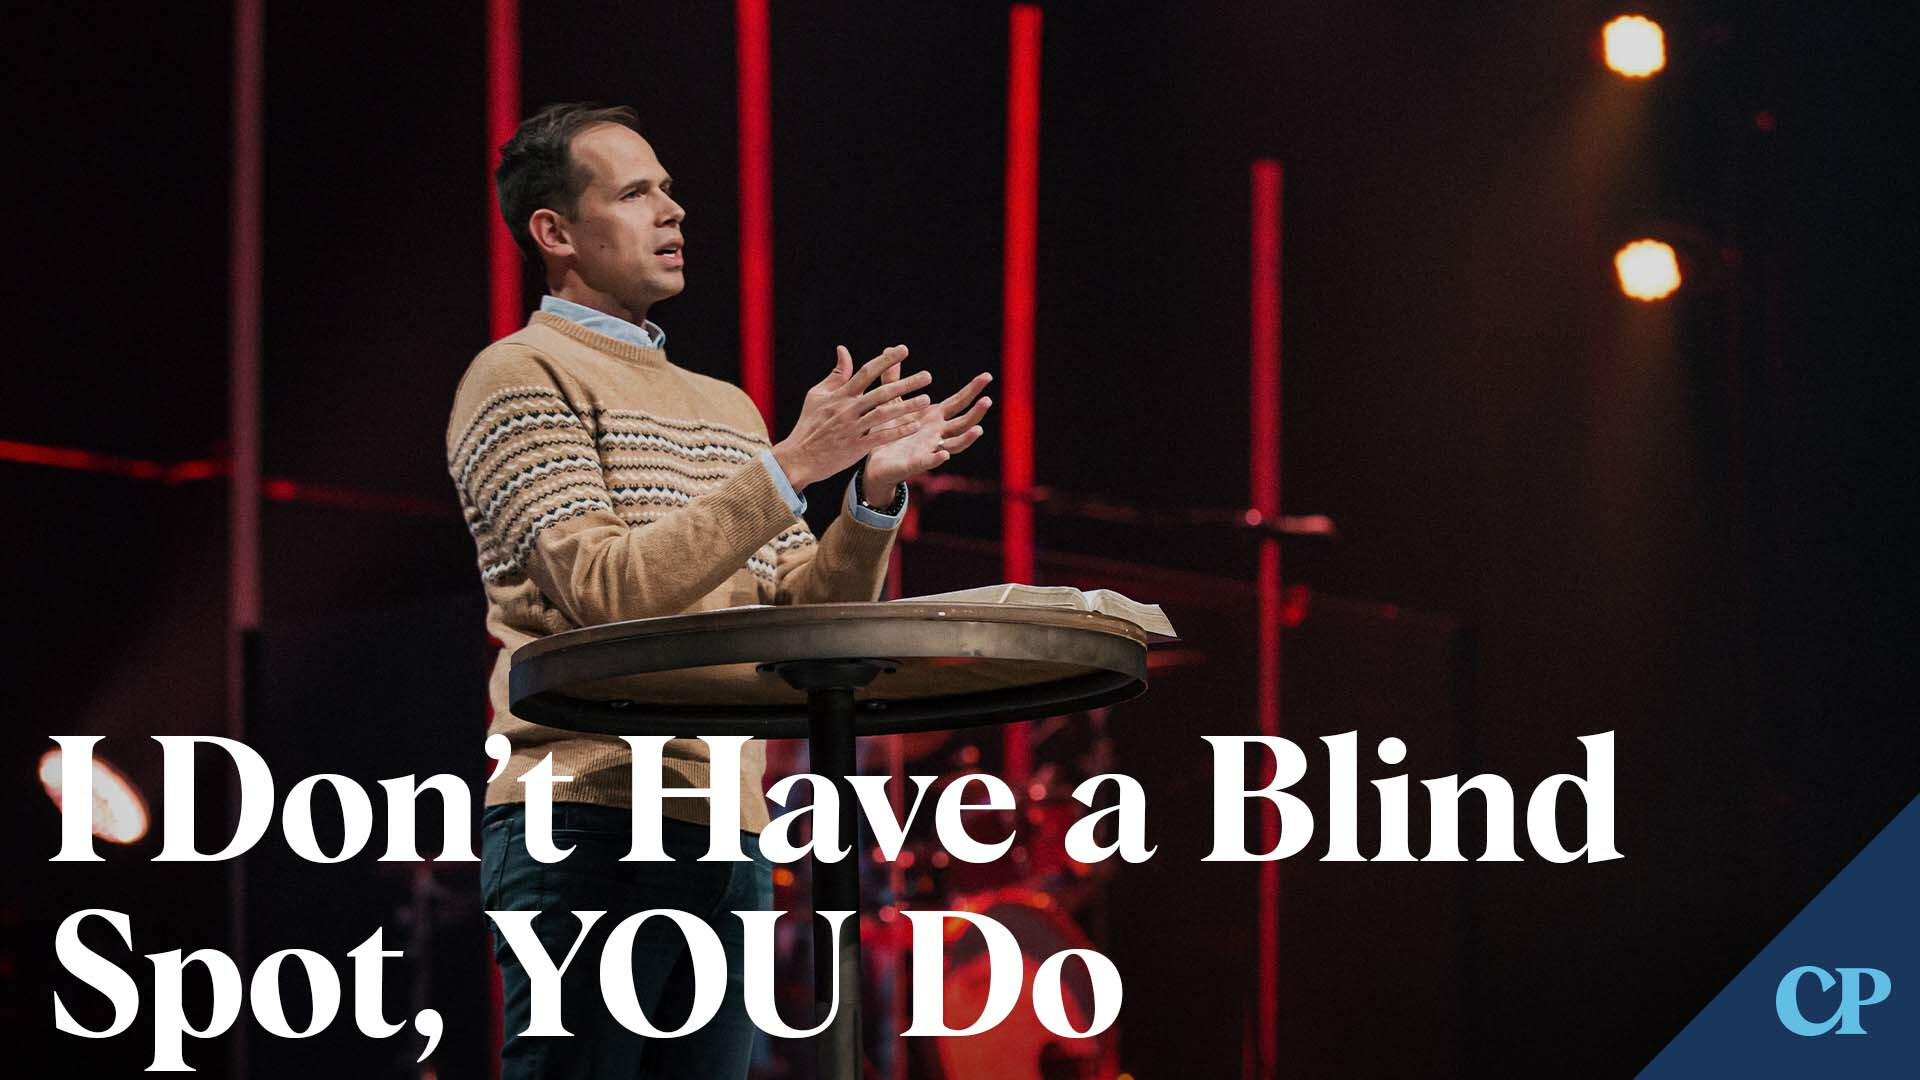 View Message: I Don't Have a Blind Spot, YOU Do